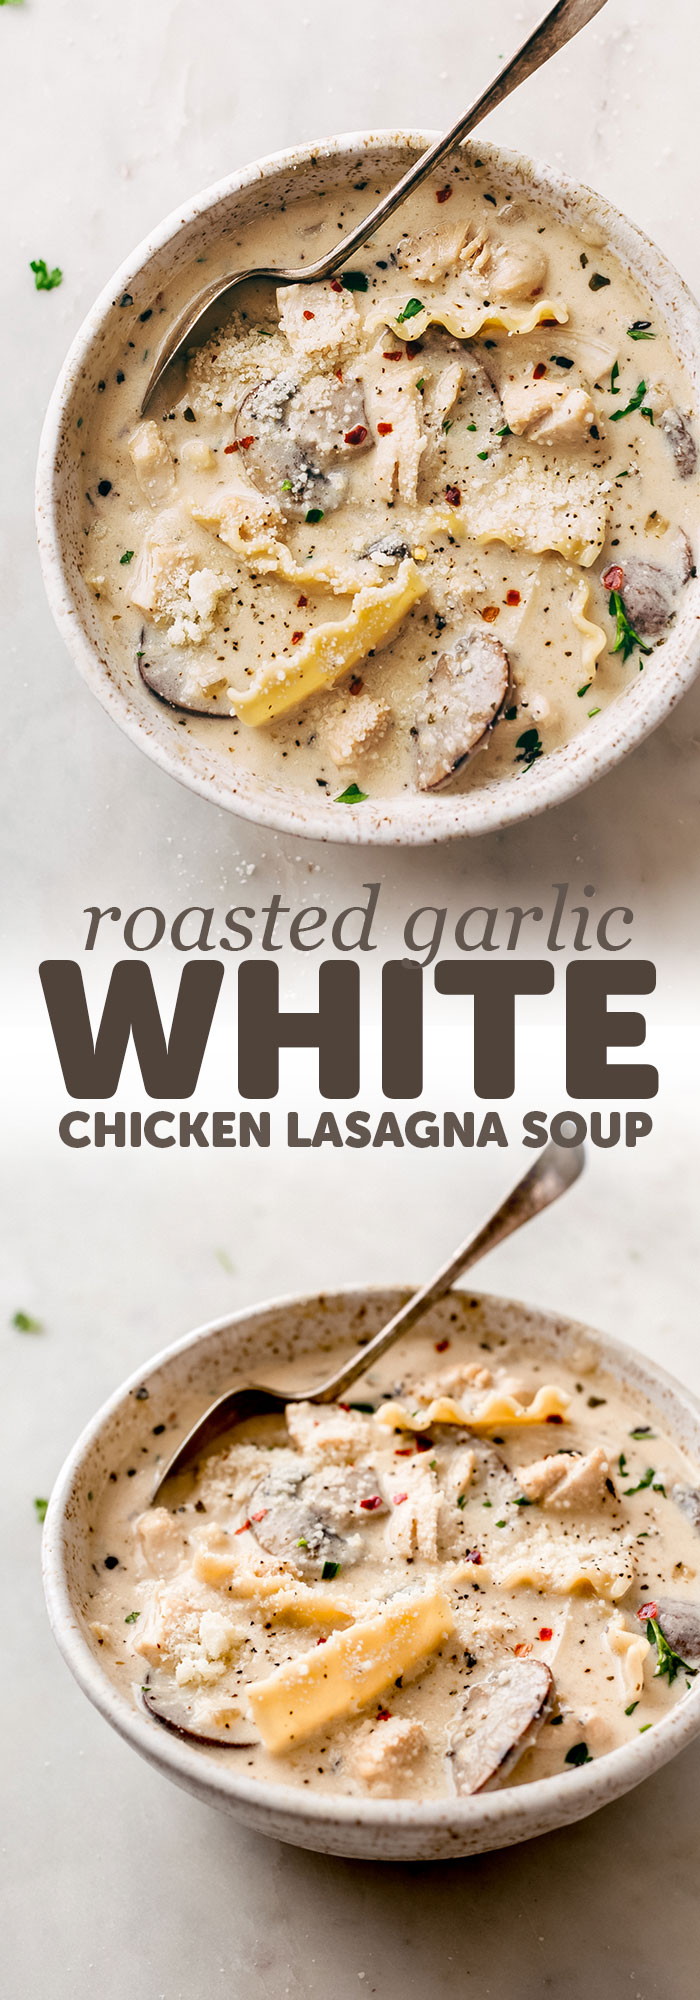 Roasted Garlic White Chicken Lasagna Soup - The coziest, creamiest, most comforting soup! This roasted garlic white chicken lasagna soup is sure to be a hit with the whole family! And it's quite quick to put together too! #lasagnasoup #roastedgarlicsoup #whitechickenlasagnasoup #creamychickennoodlesoup | Littlespicejar.com